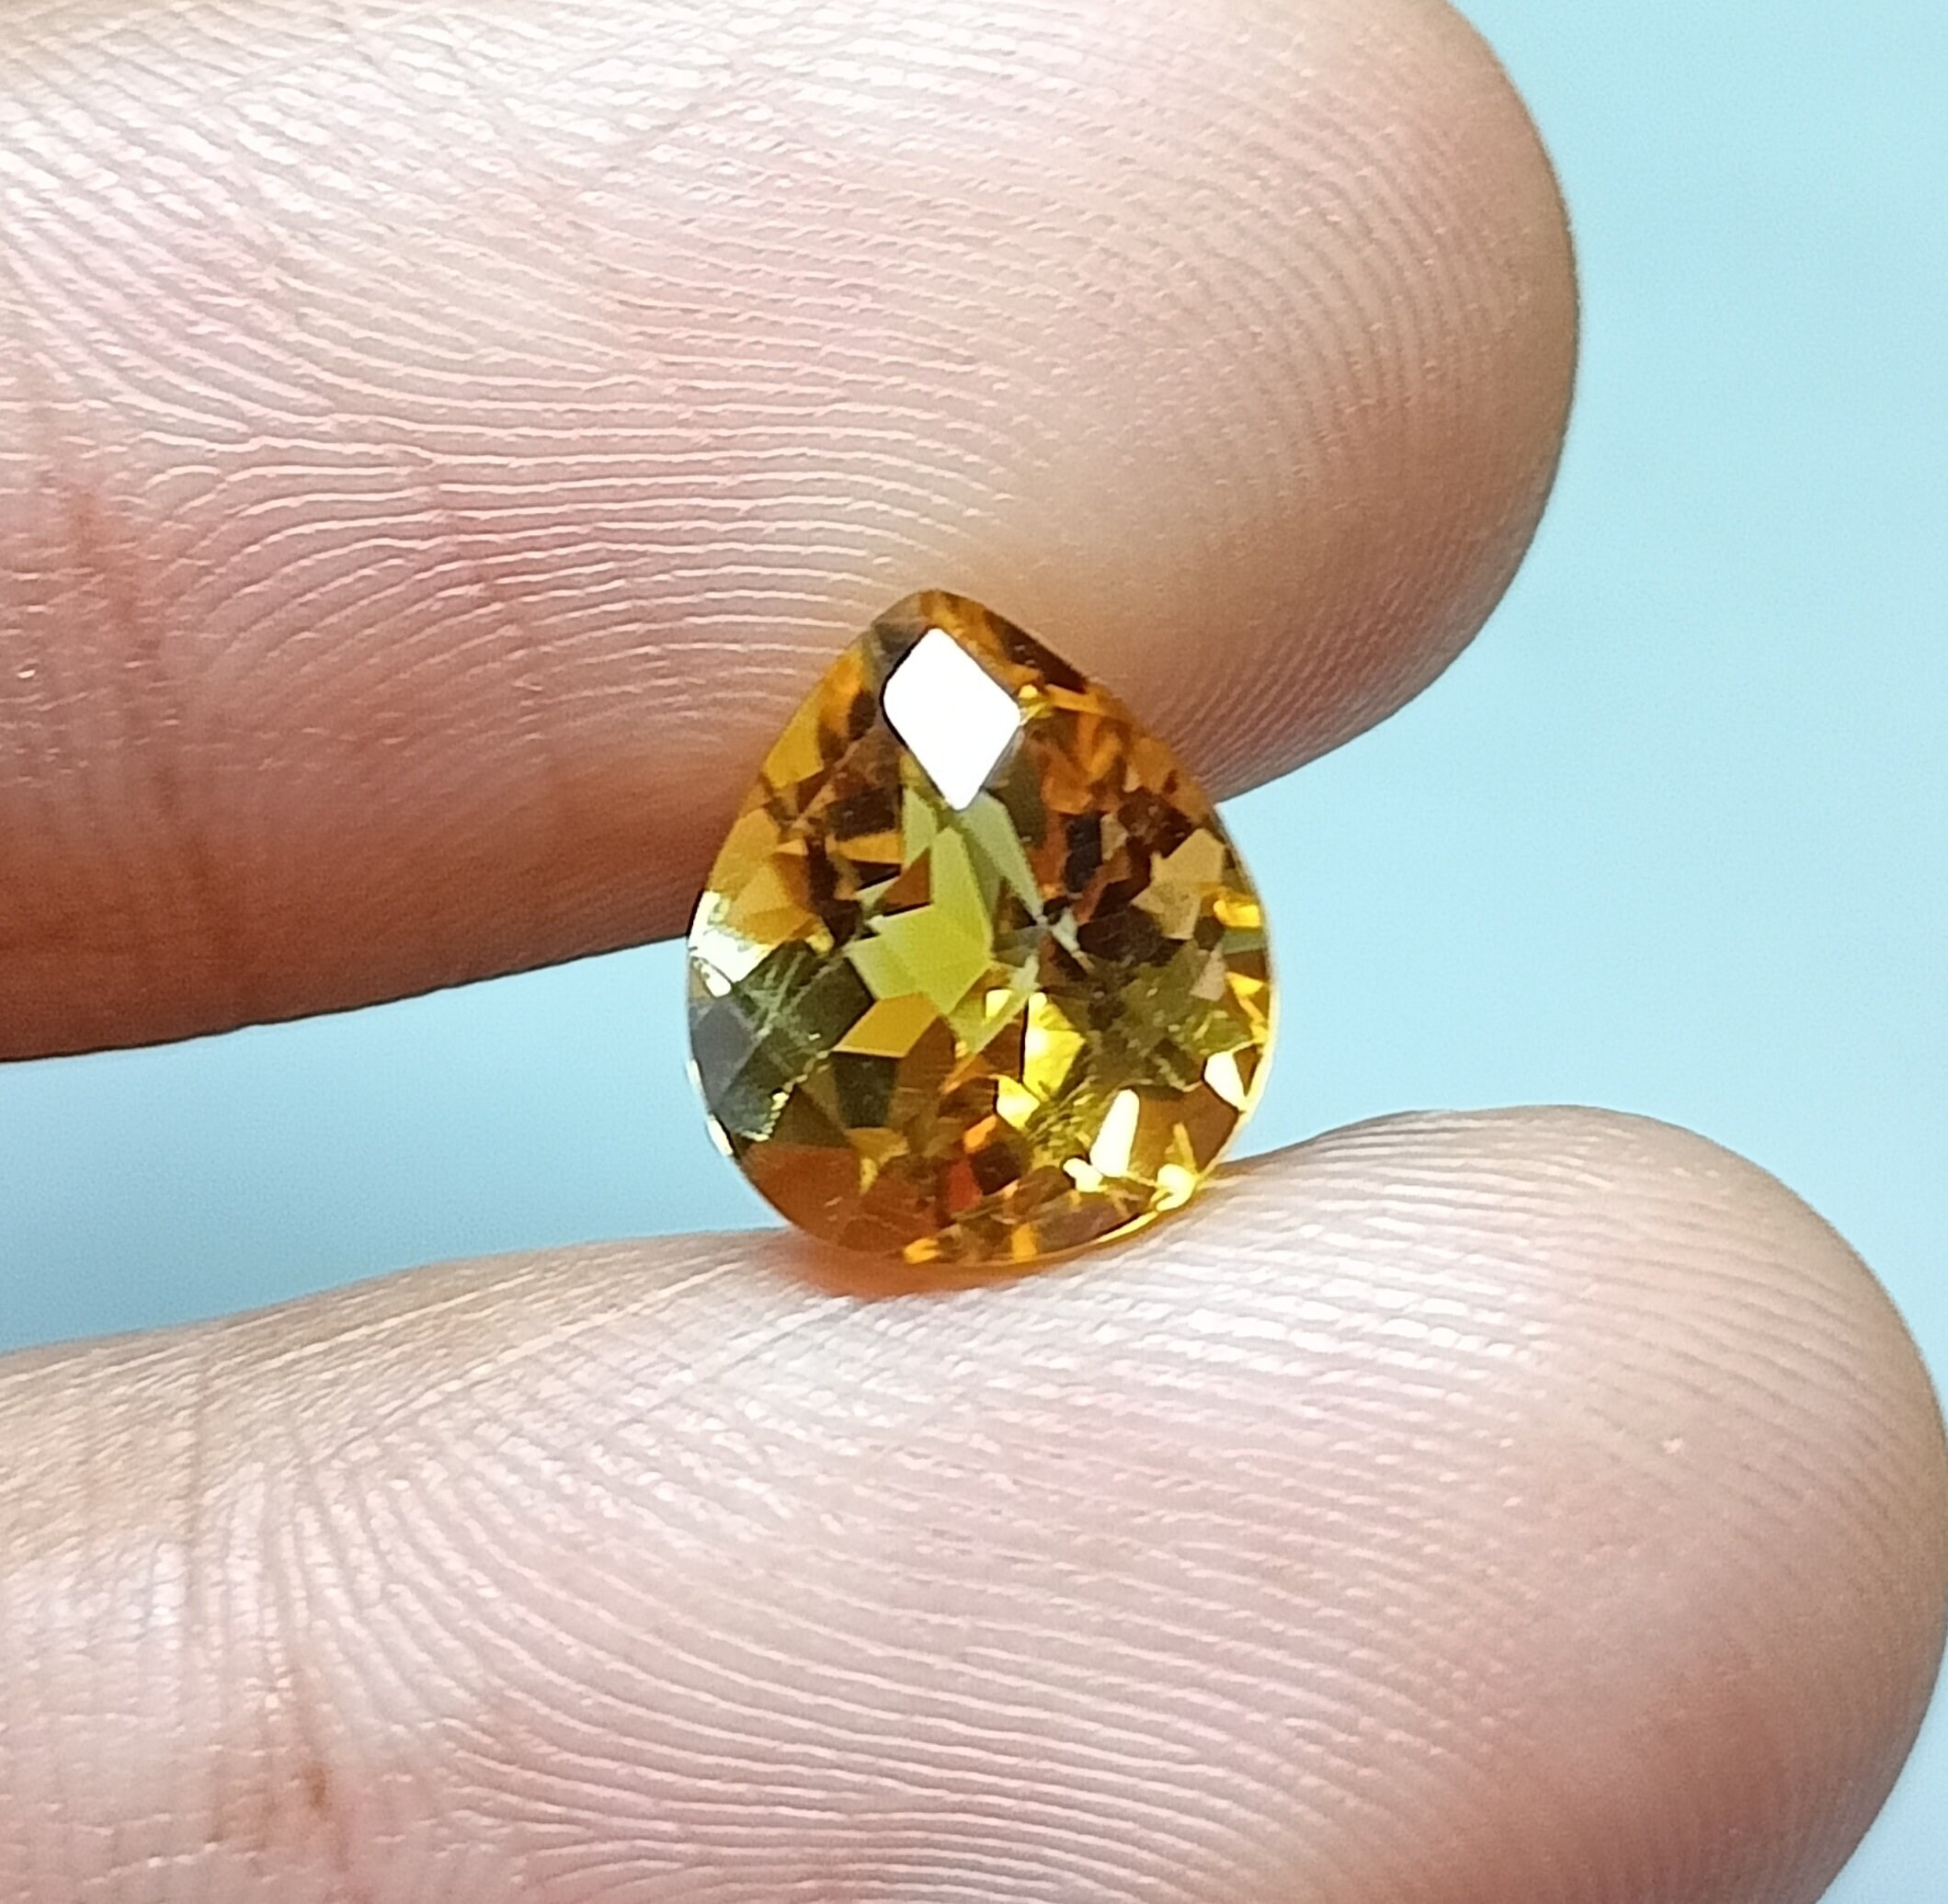 Natural Citrine Faceted Gemstone S-434 5.10 Ct Best For Silver Jewelry Loose Gemstone jewelry making Gemstone